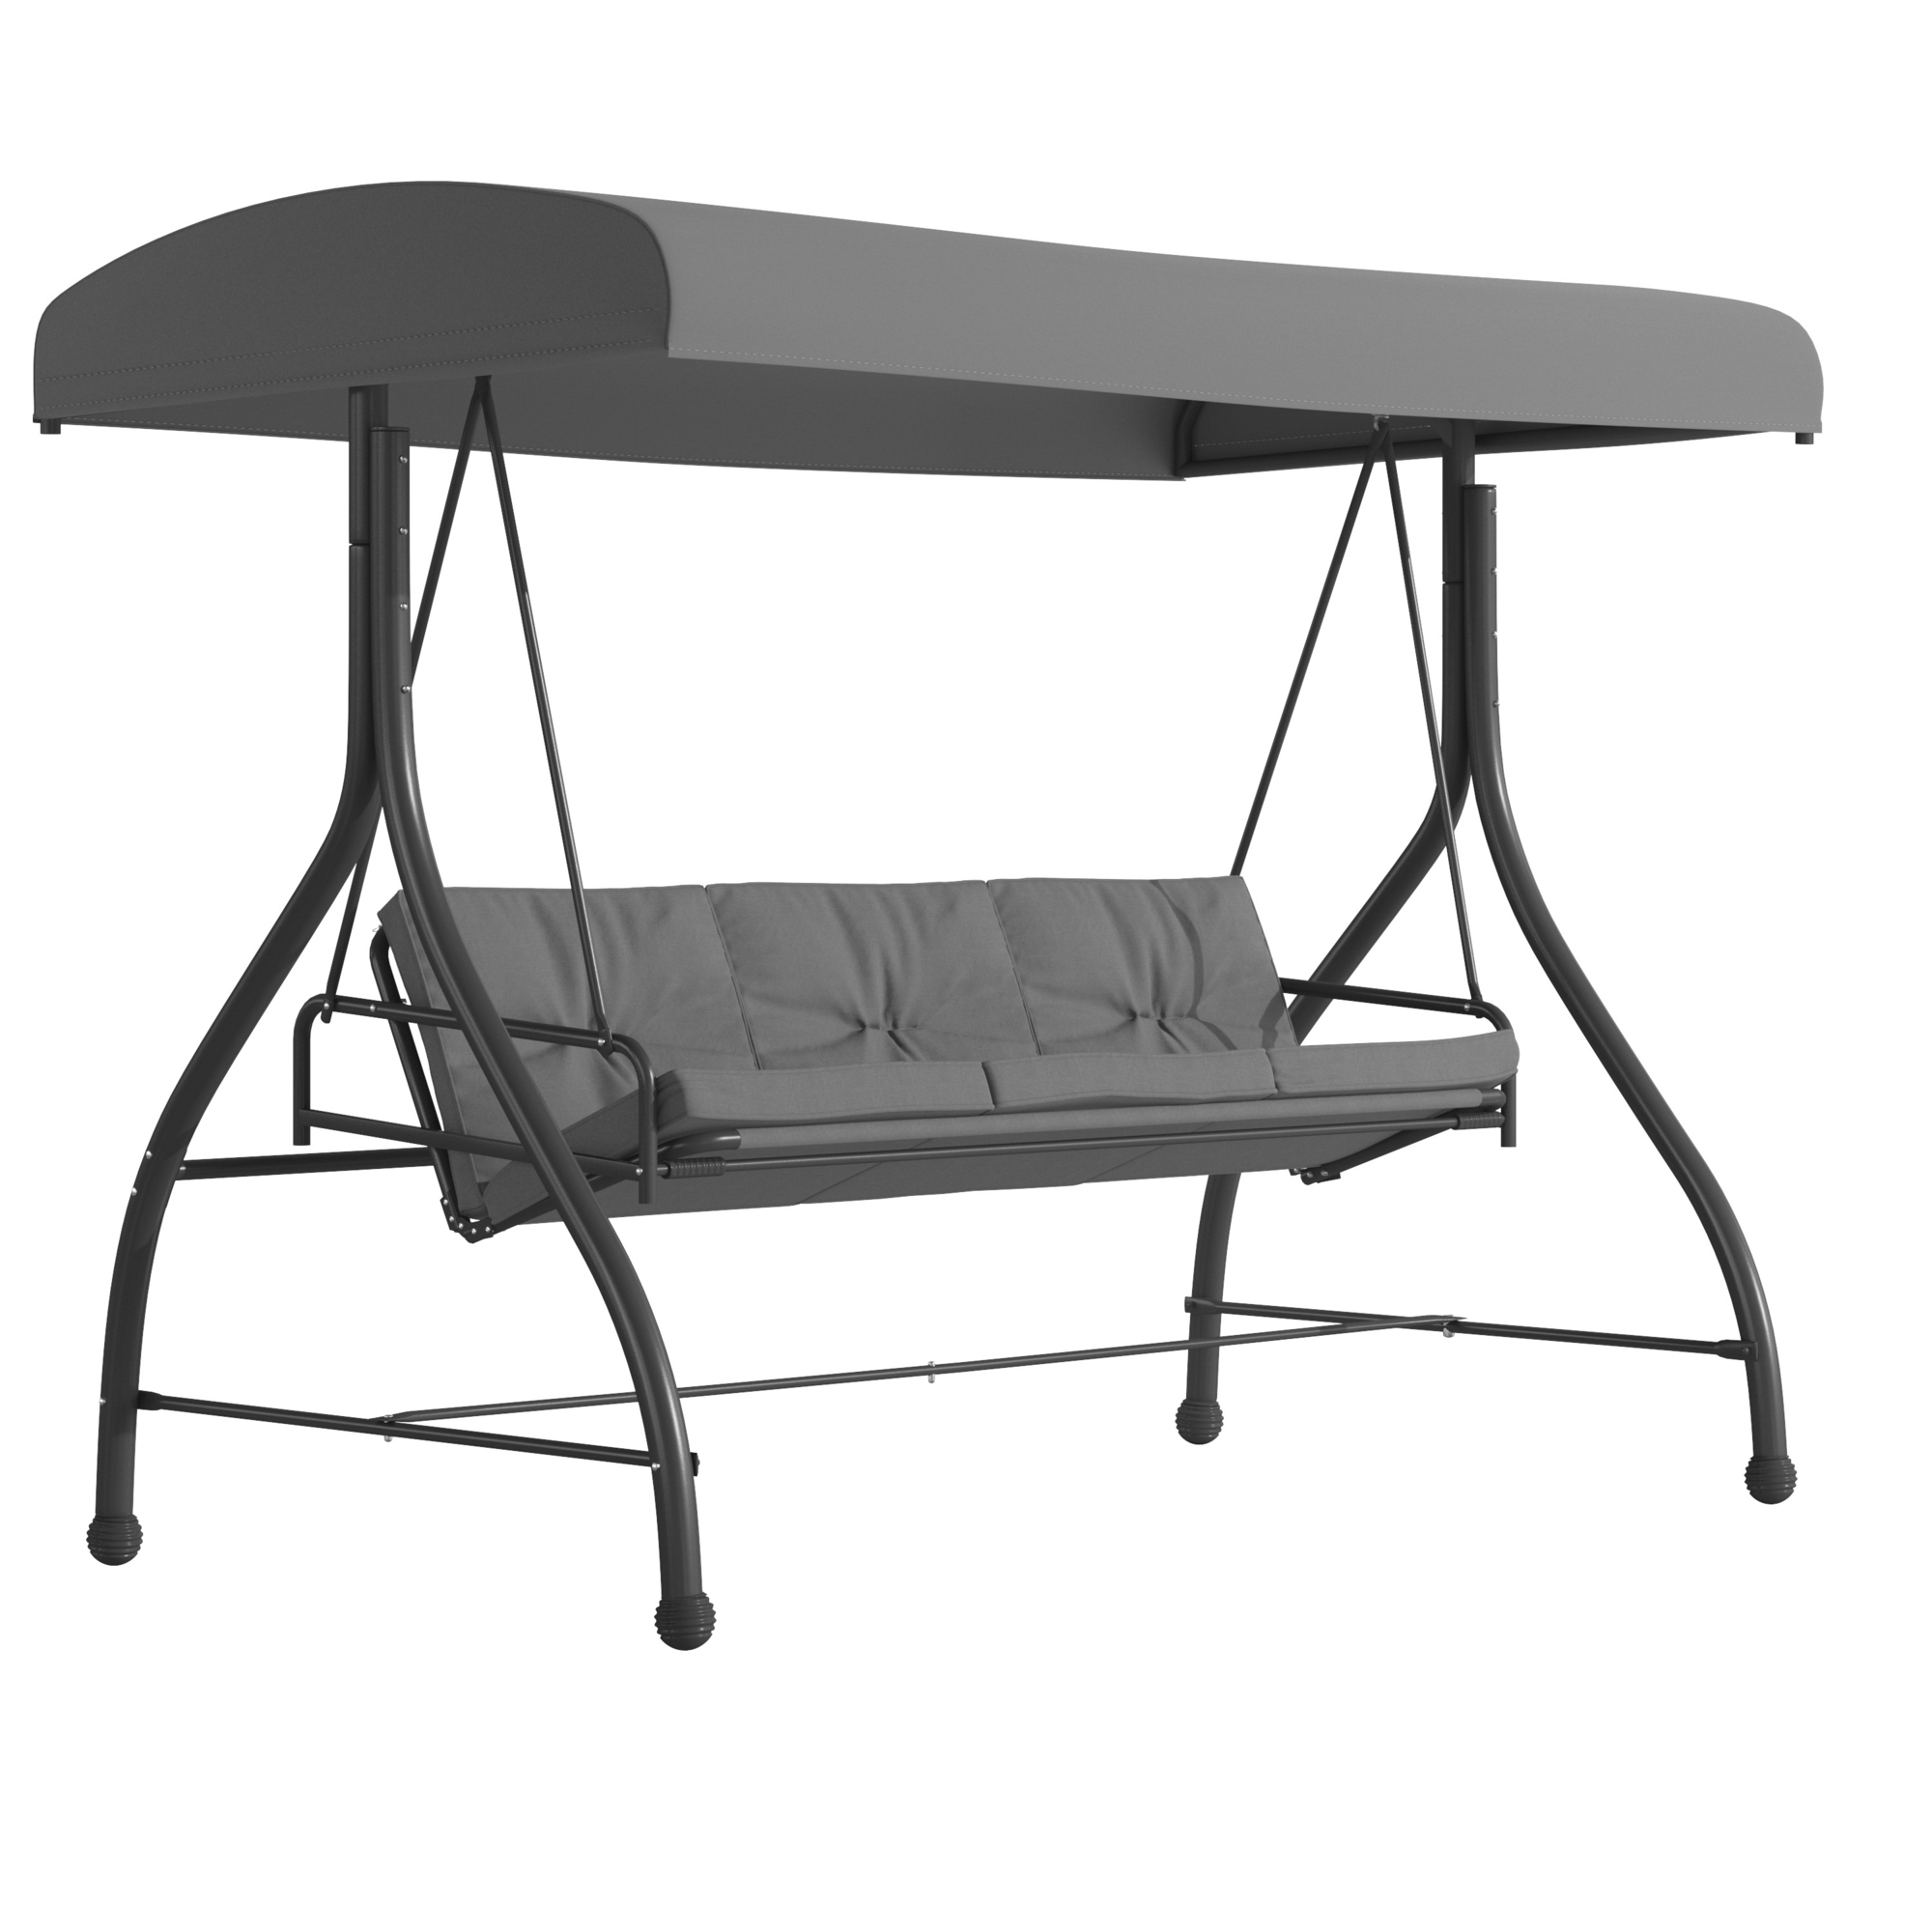 Flash Furniture, Gray 3-Seater Convertible Canopy Patio Swing/Bed, Primary Color Gray, Material Steel, Width 86 in, Model TLH007GY